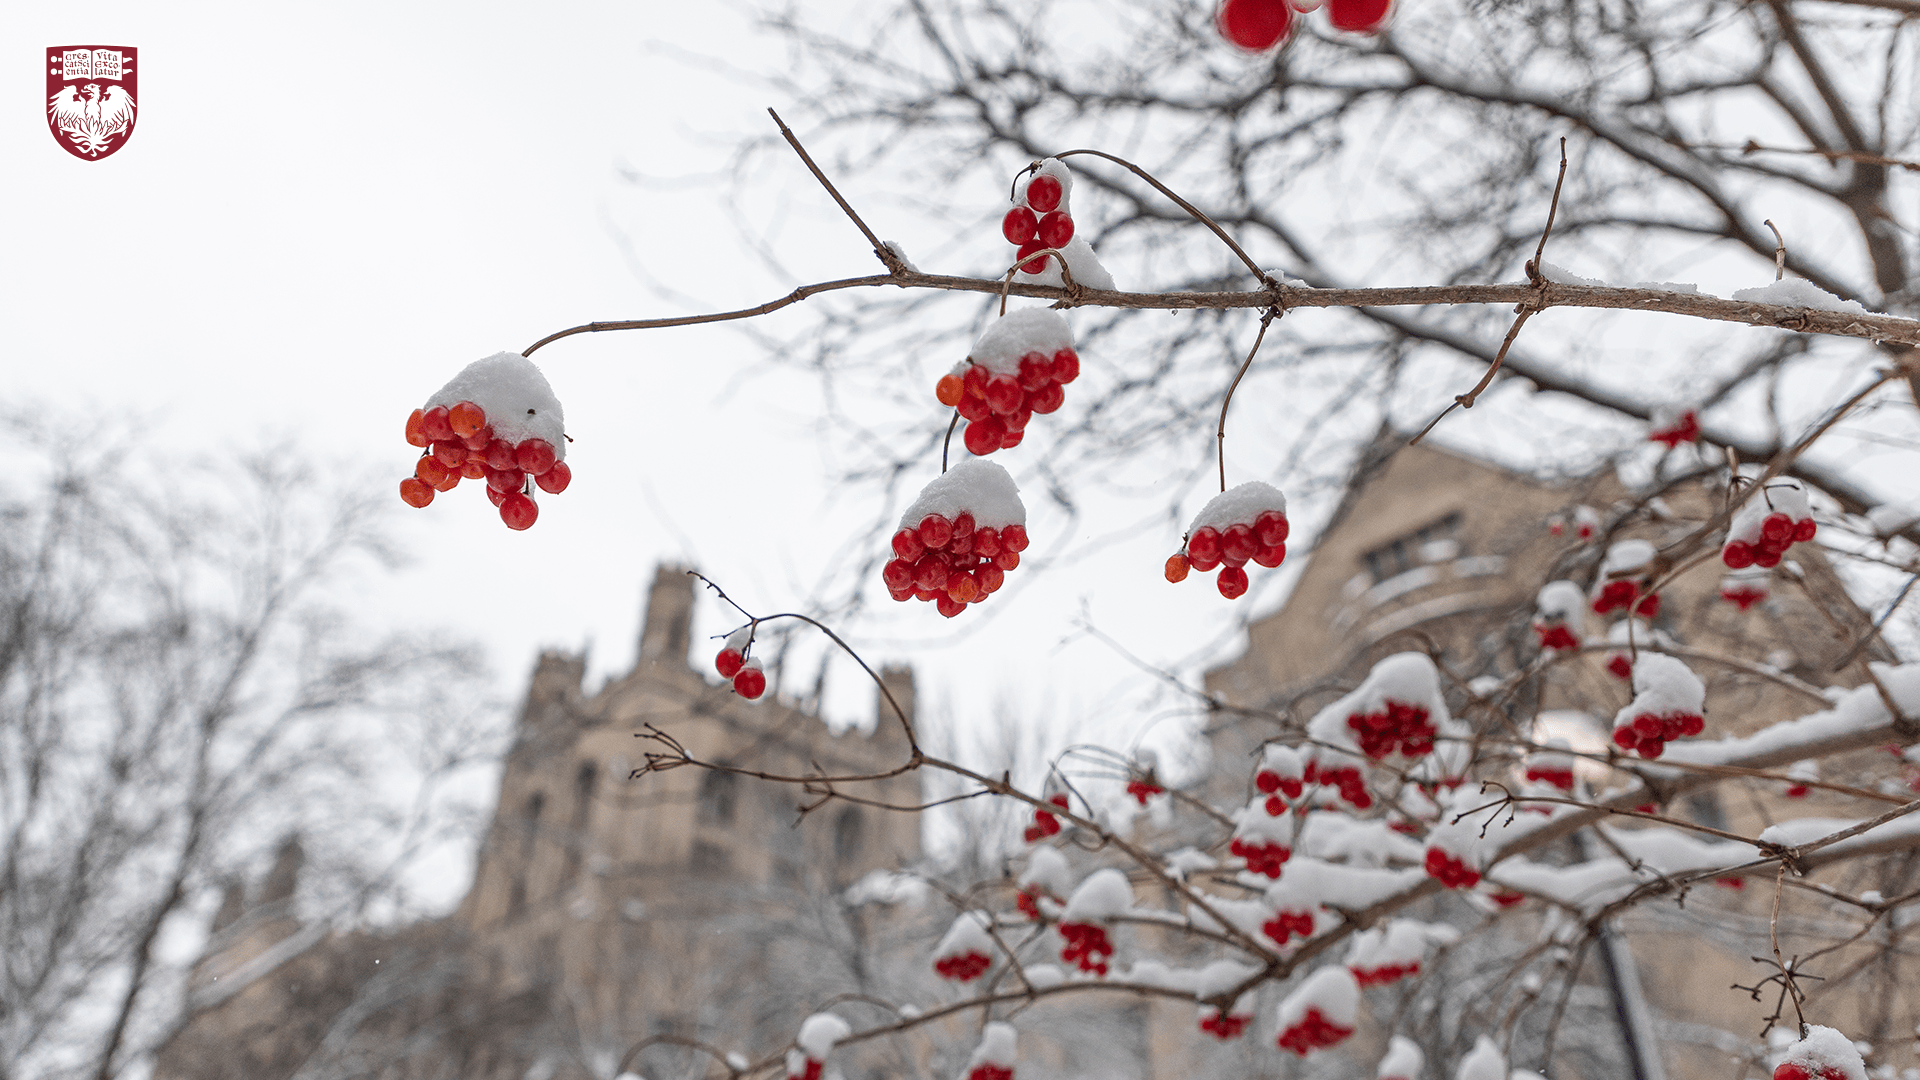 Snow on clusters of red berries hanging from tree branches